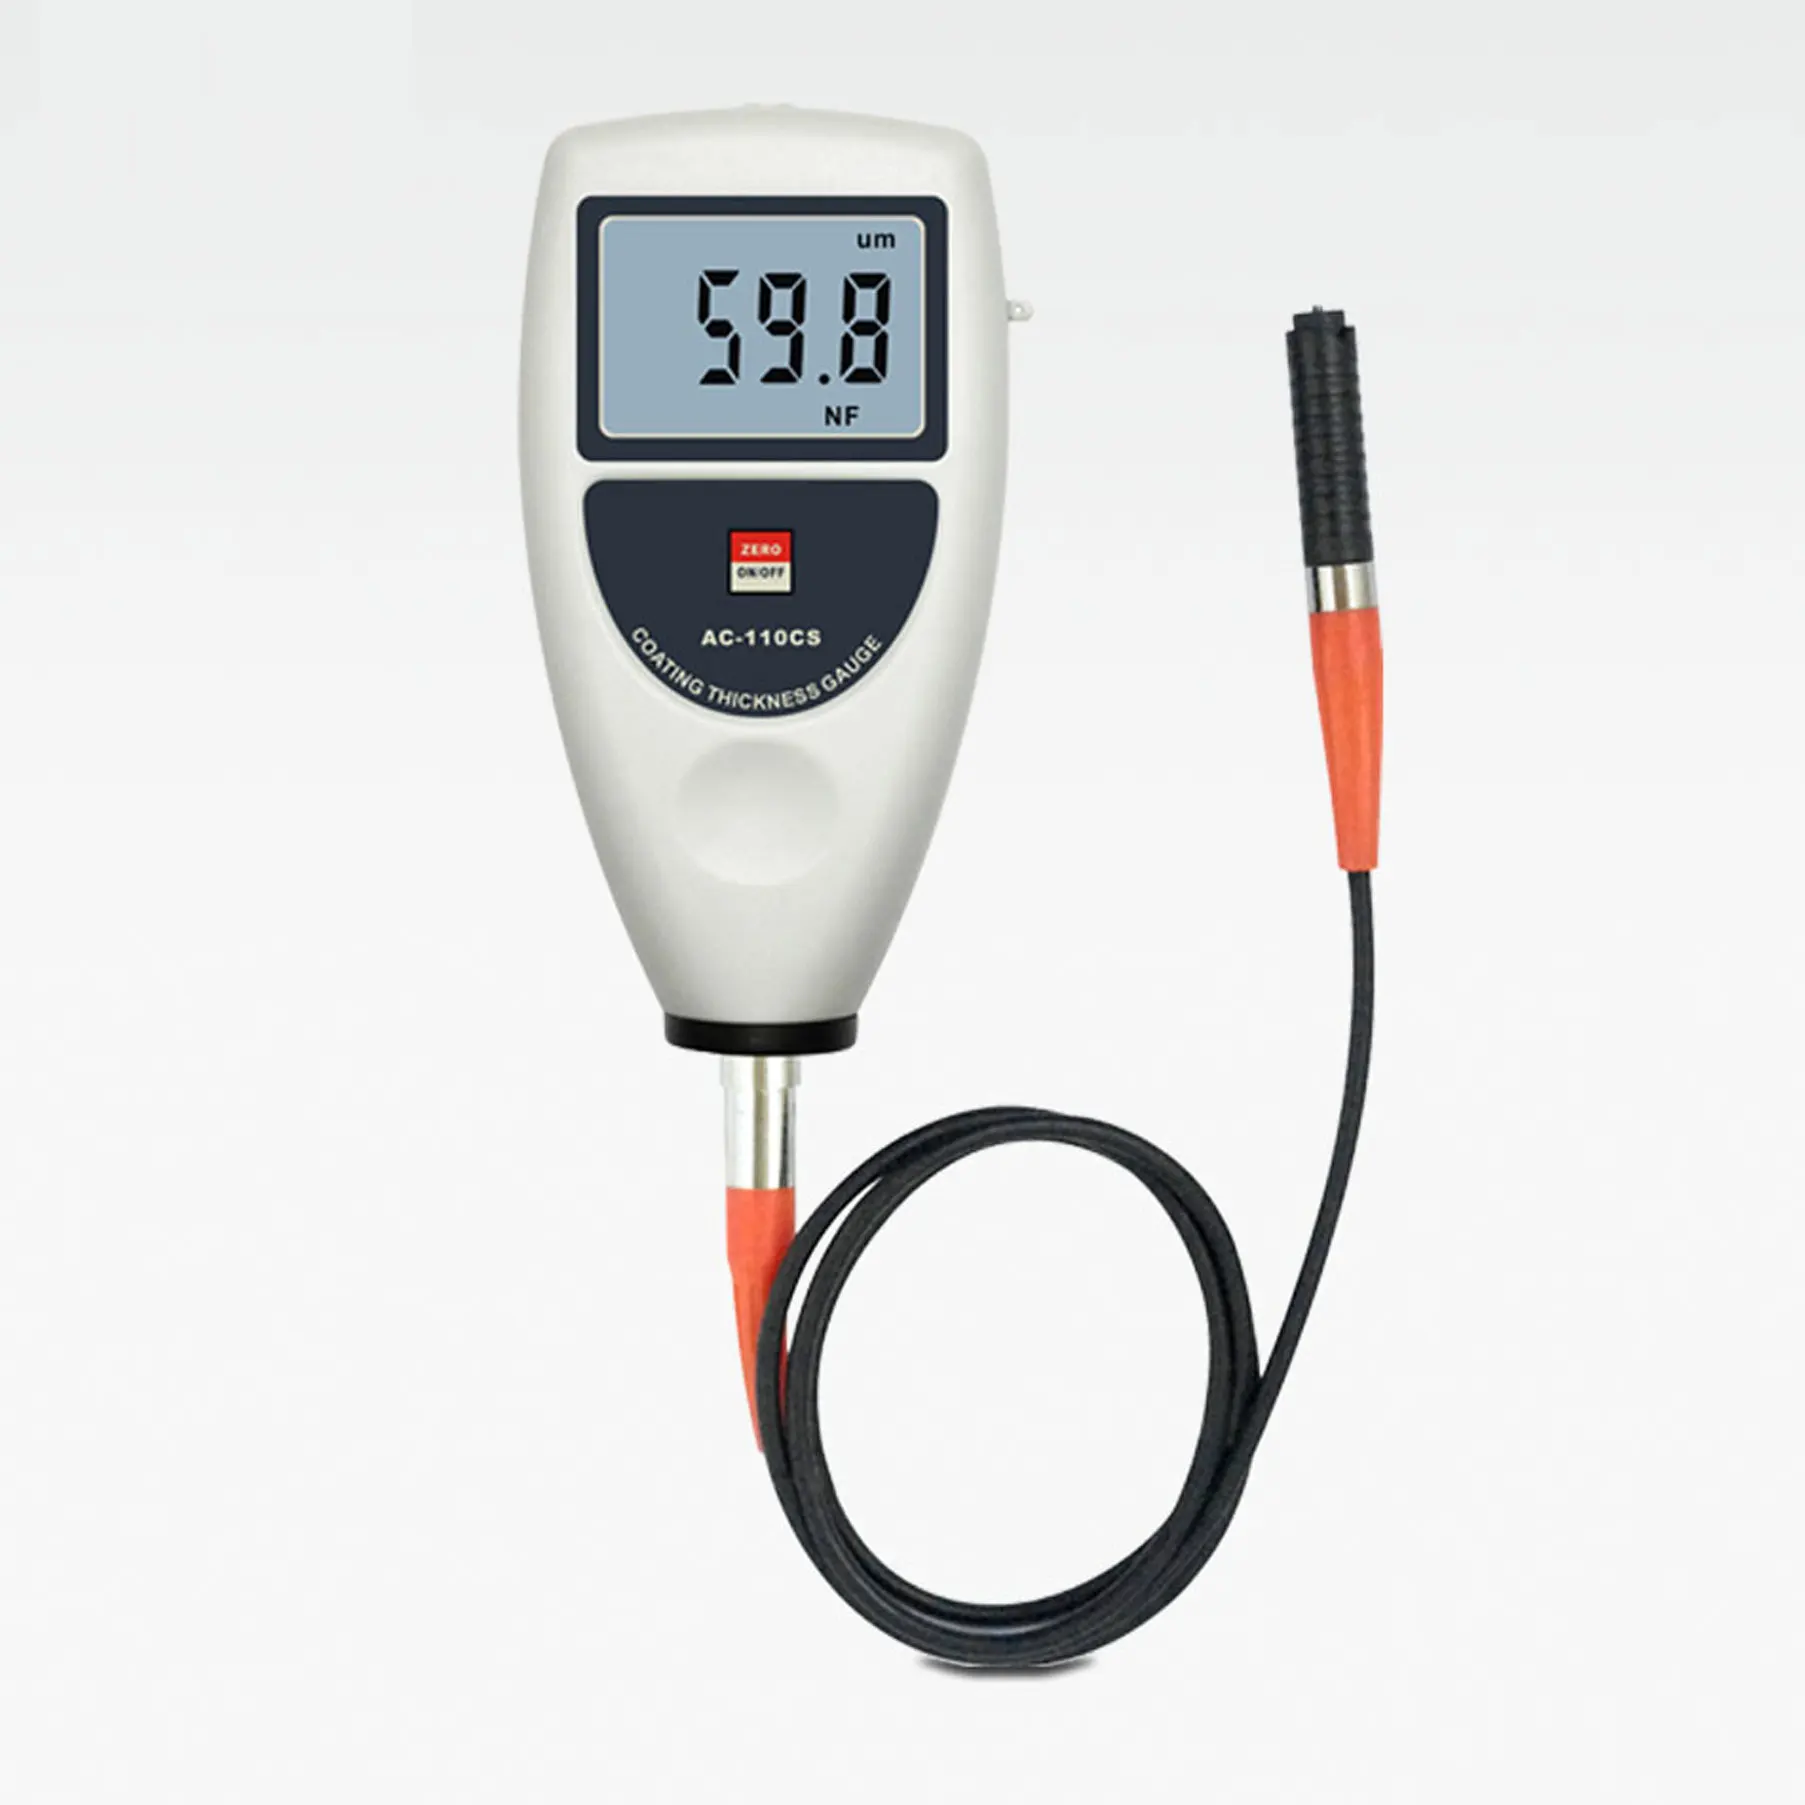 

Portable AC-110CS Digital Coating Thickness Gauge For Automotive, Paint Type Thickness Gauge Basic Type Coating precise